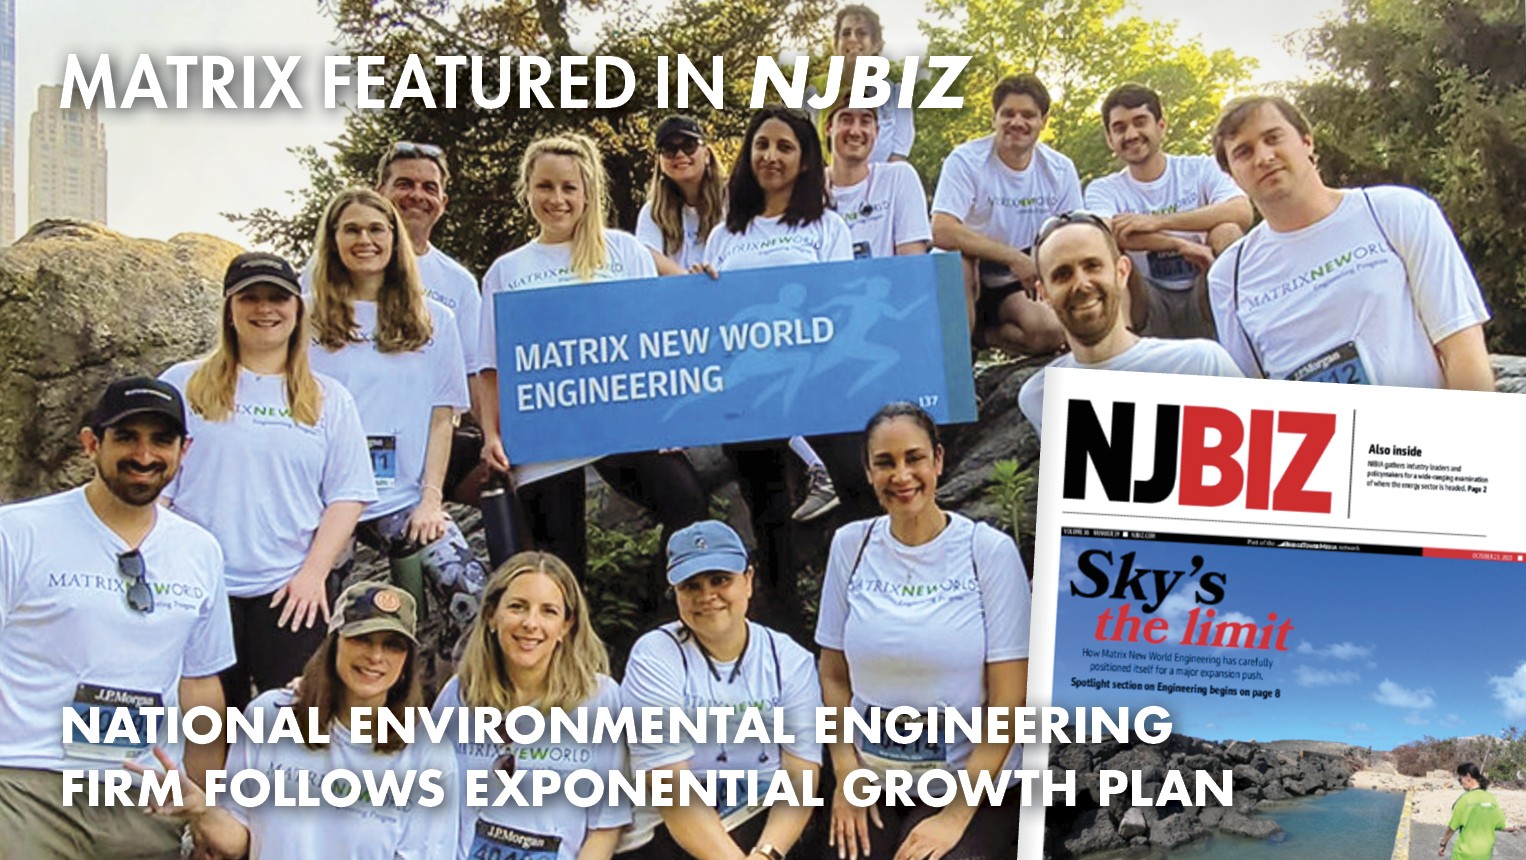 Matrix staff group photo in NYC with NJBIZ cover Image and text